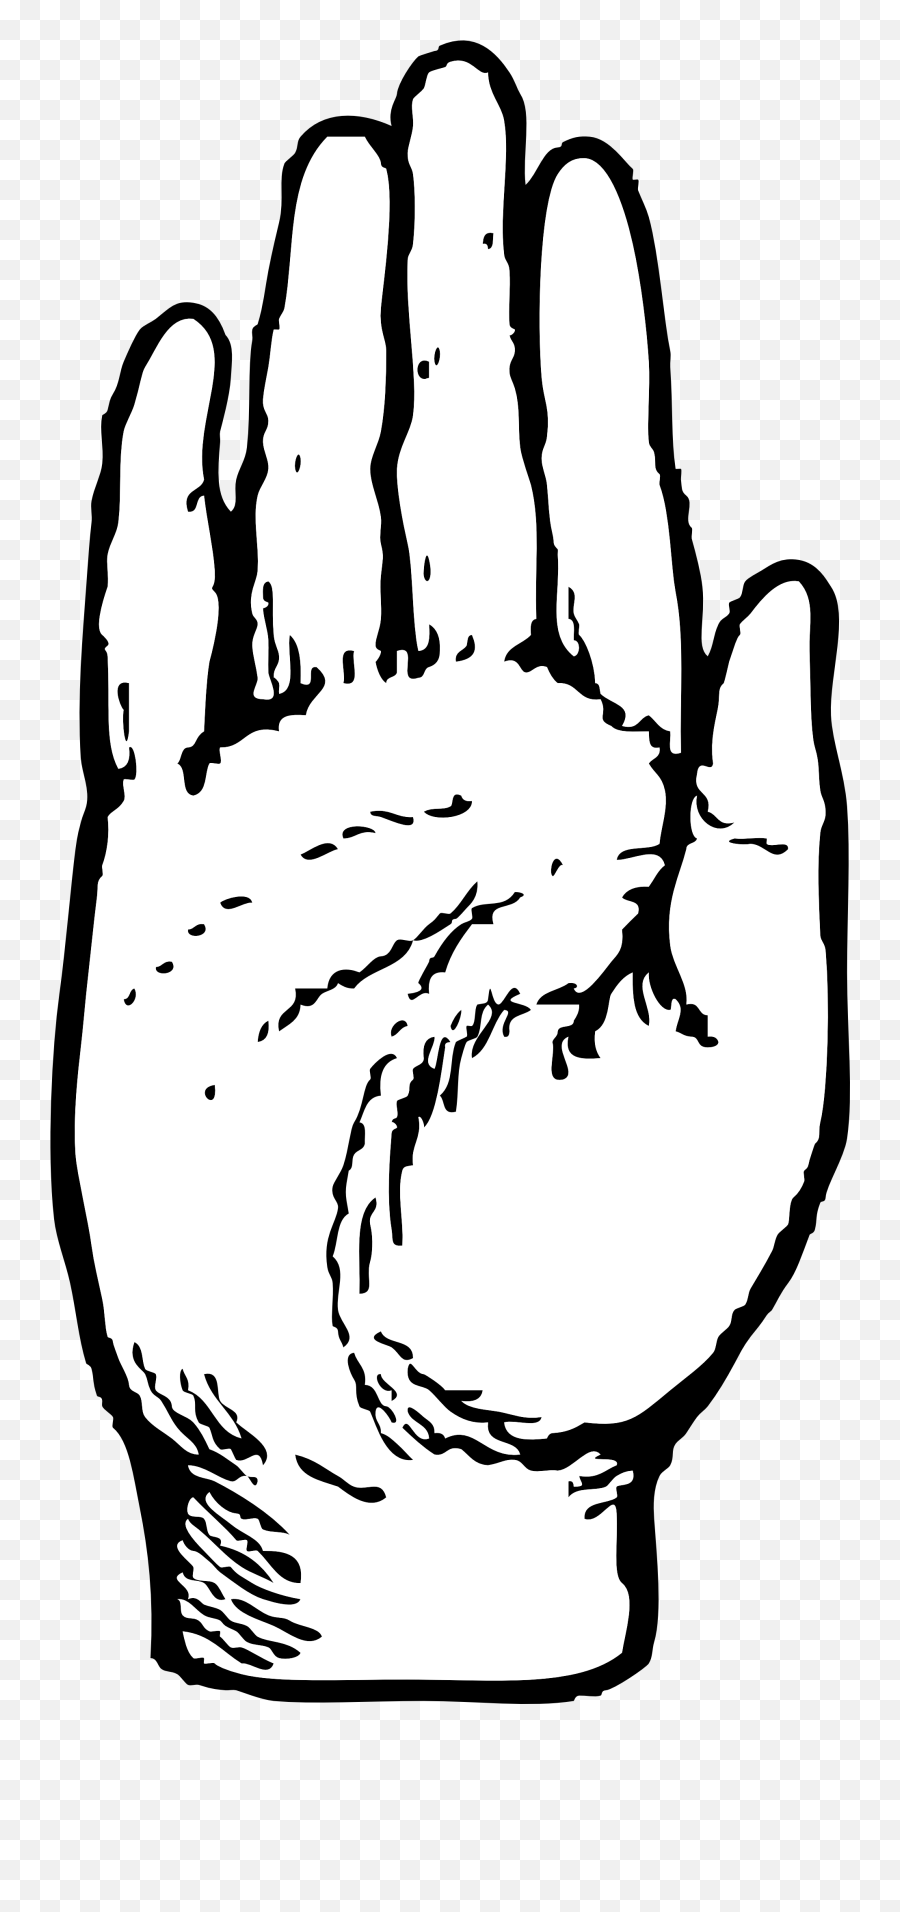 Free Clapping Hands Clipart Black And White Download Free - Hand Clip Art Emoji,Clapping Hands Emoji Meme